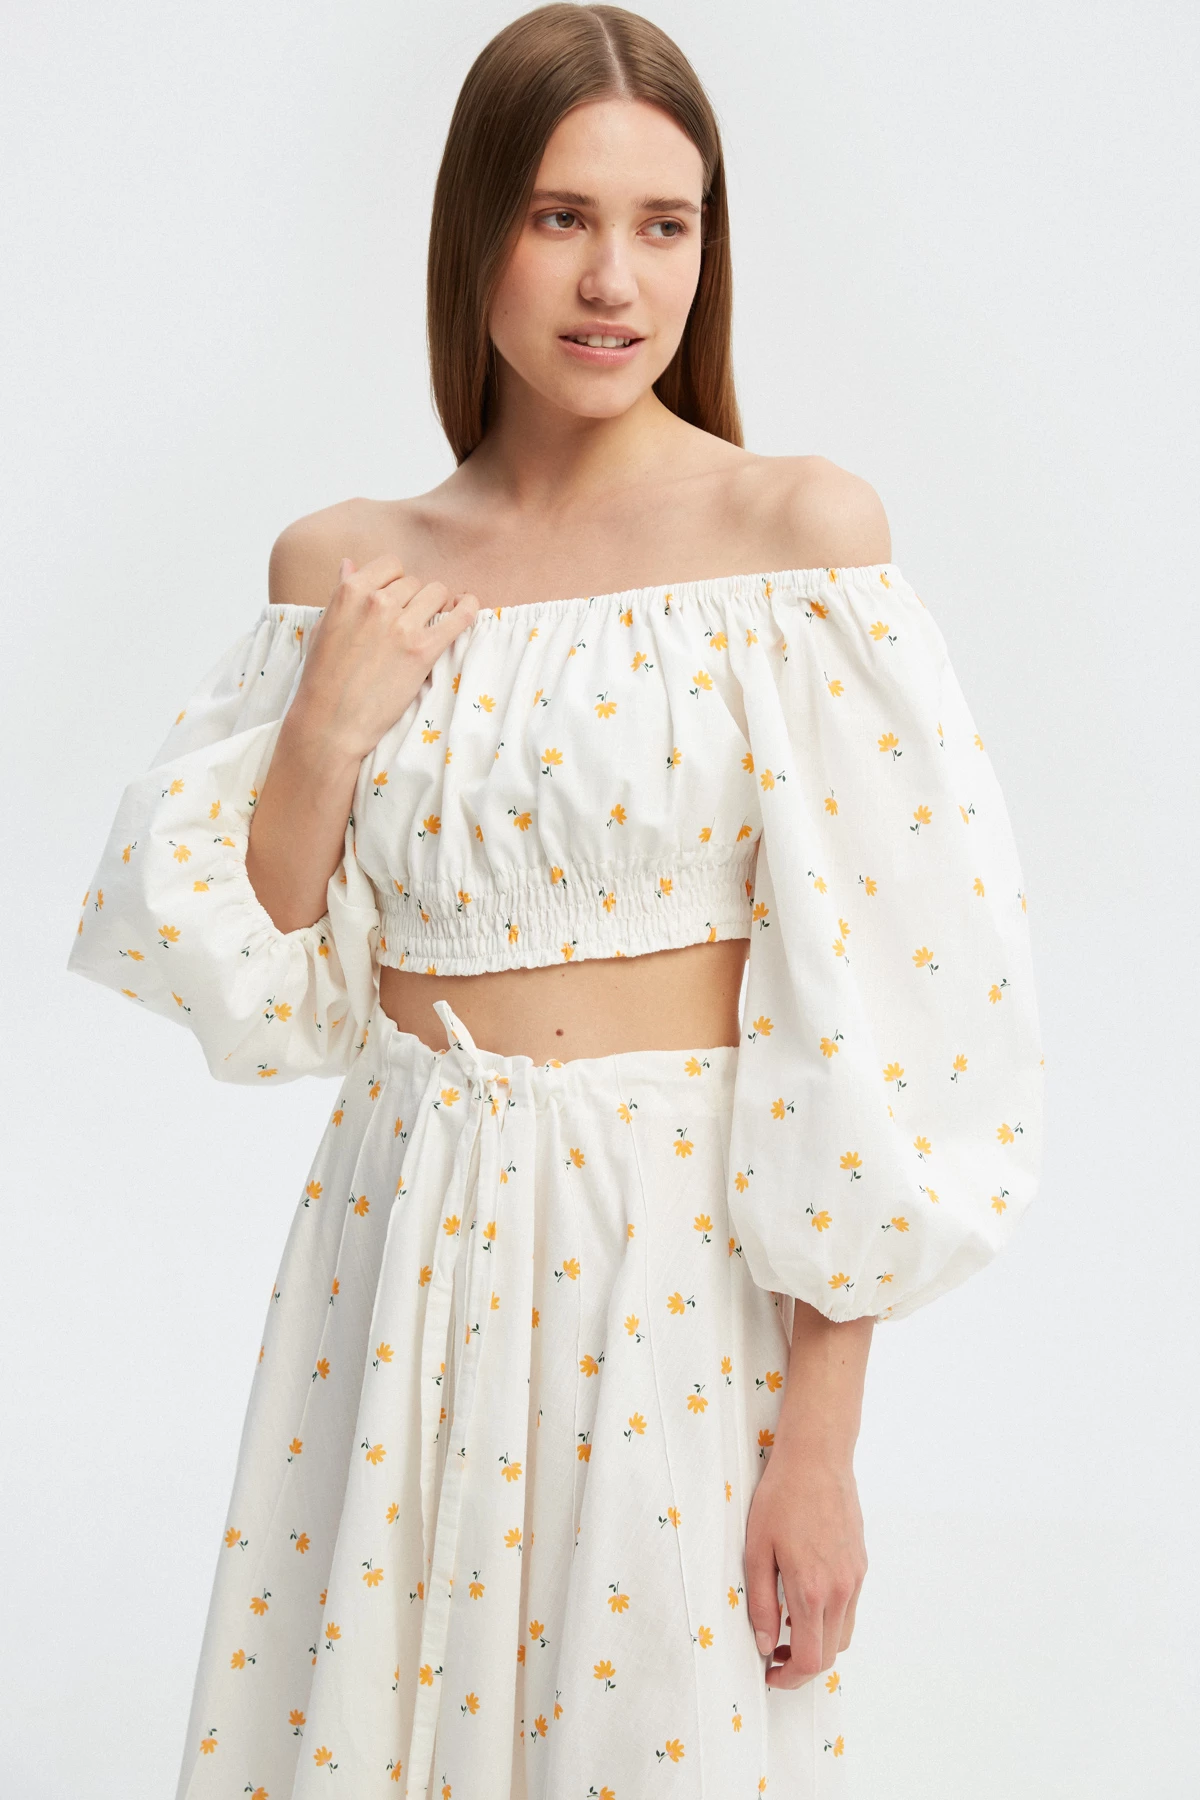 White cotton top with yellow flowers print, photo 1